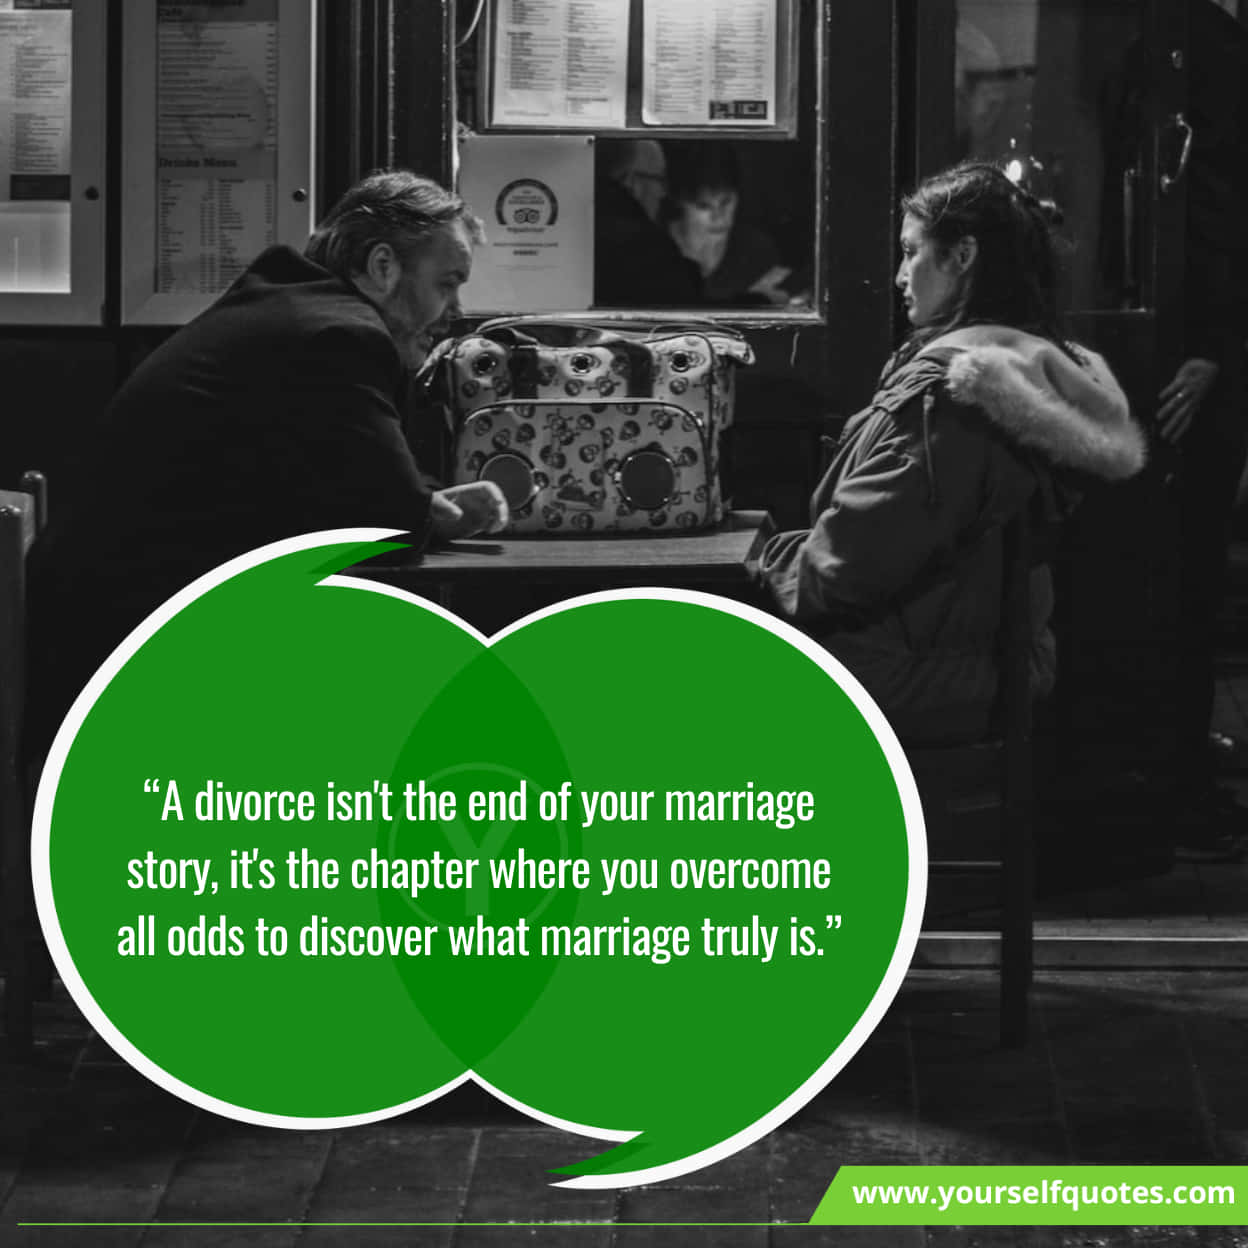 Inspiring Quotes About Divorce